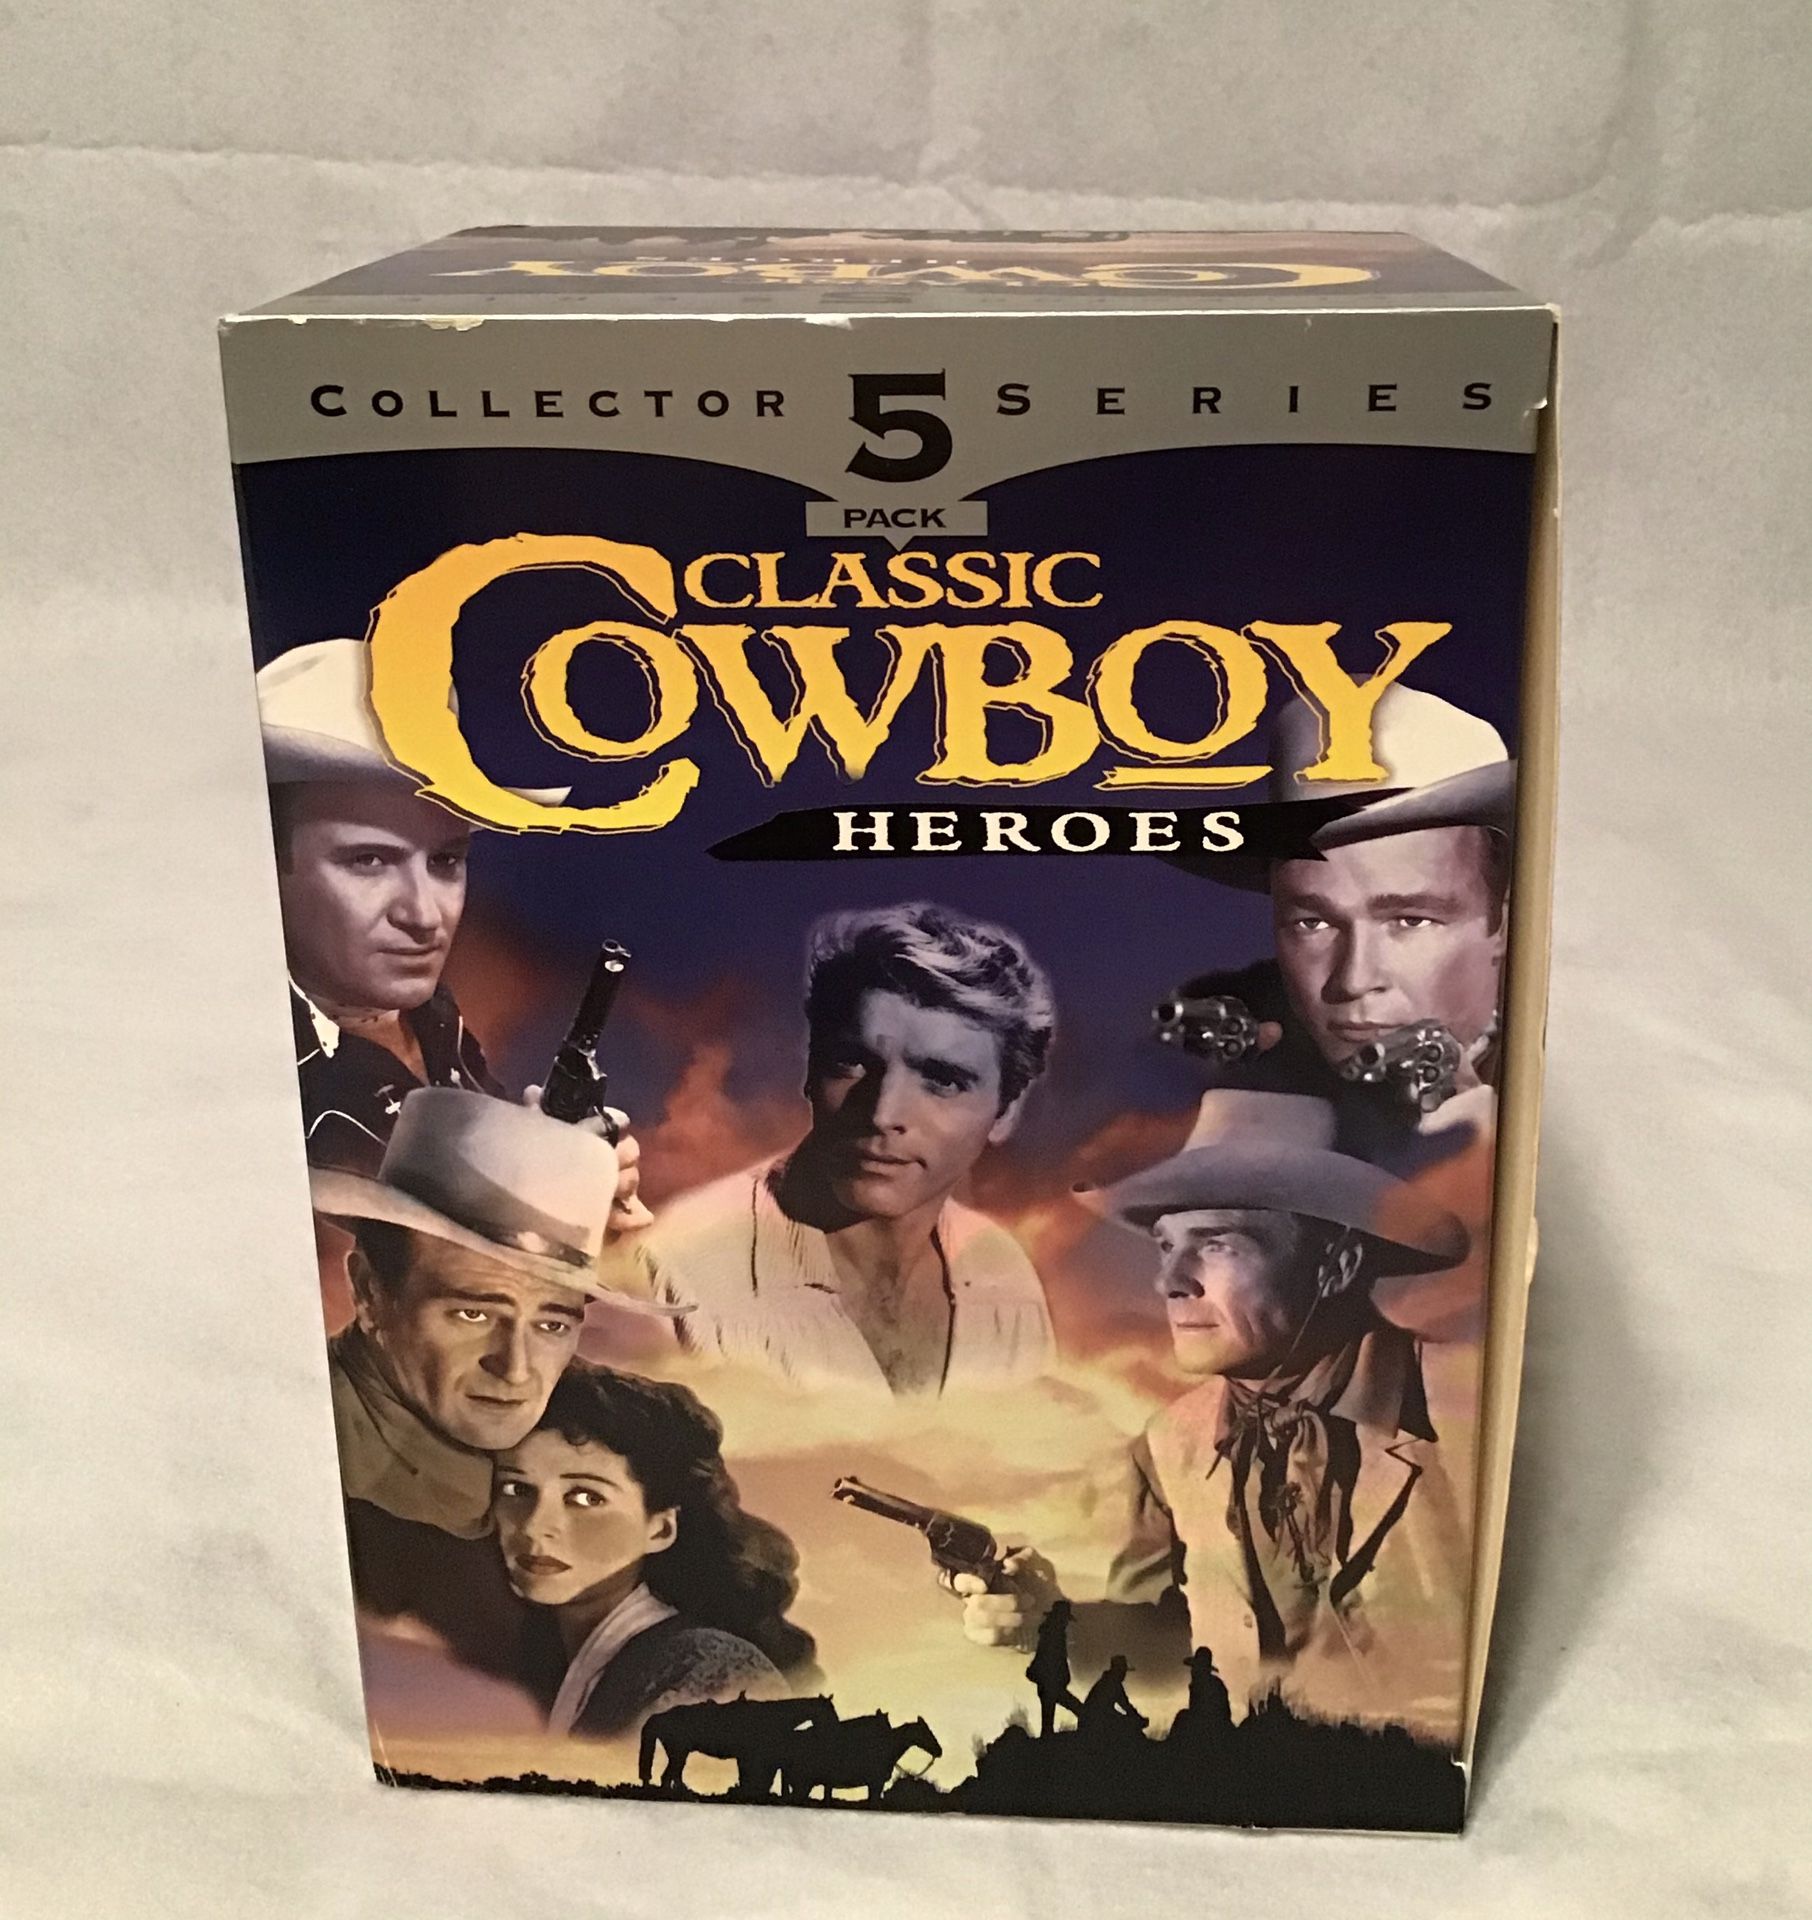 Classic Cowboy Heroes 5 Pack Collector Series